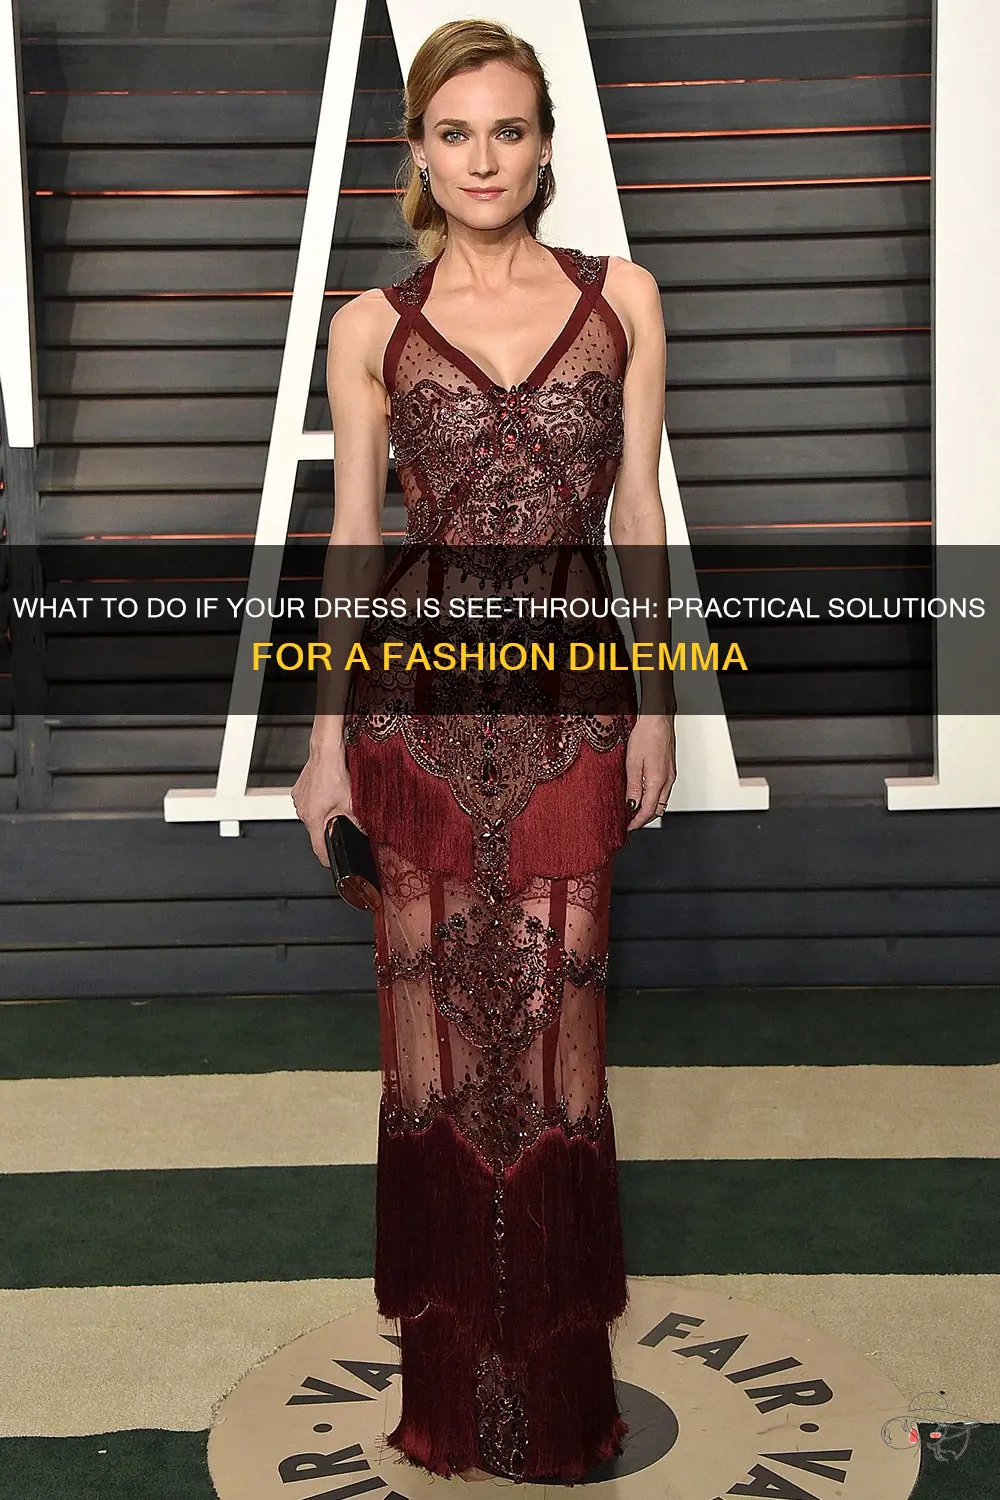 What To Do If Your Dress Is See-Through: Practical Solutions For A ...